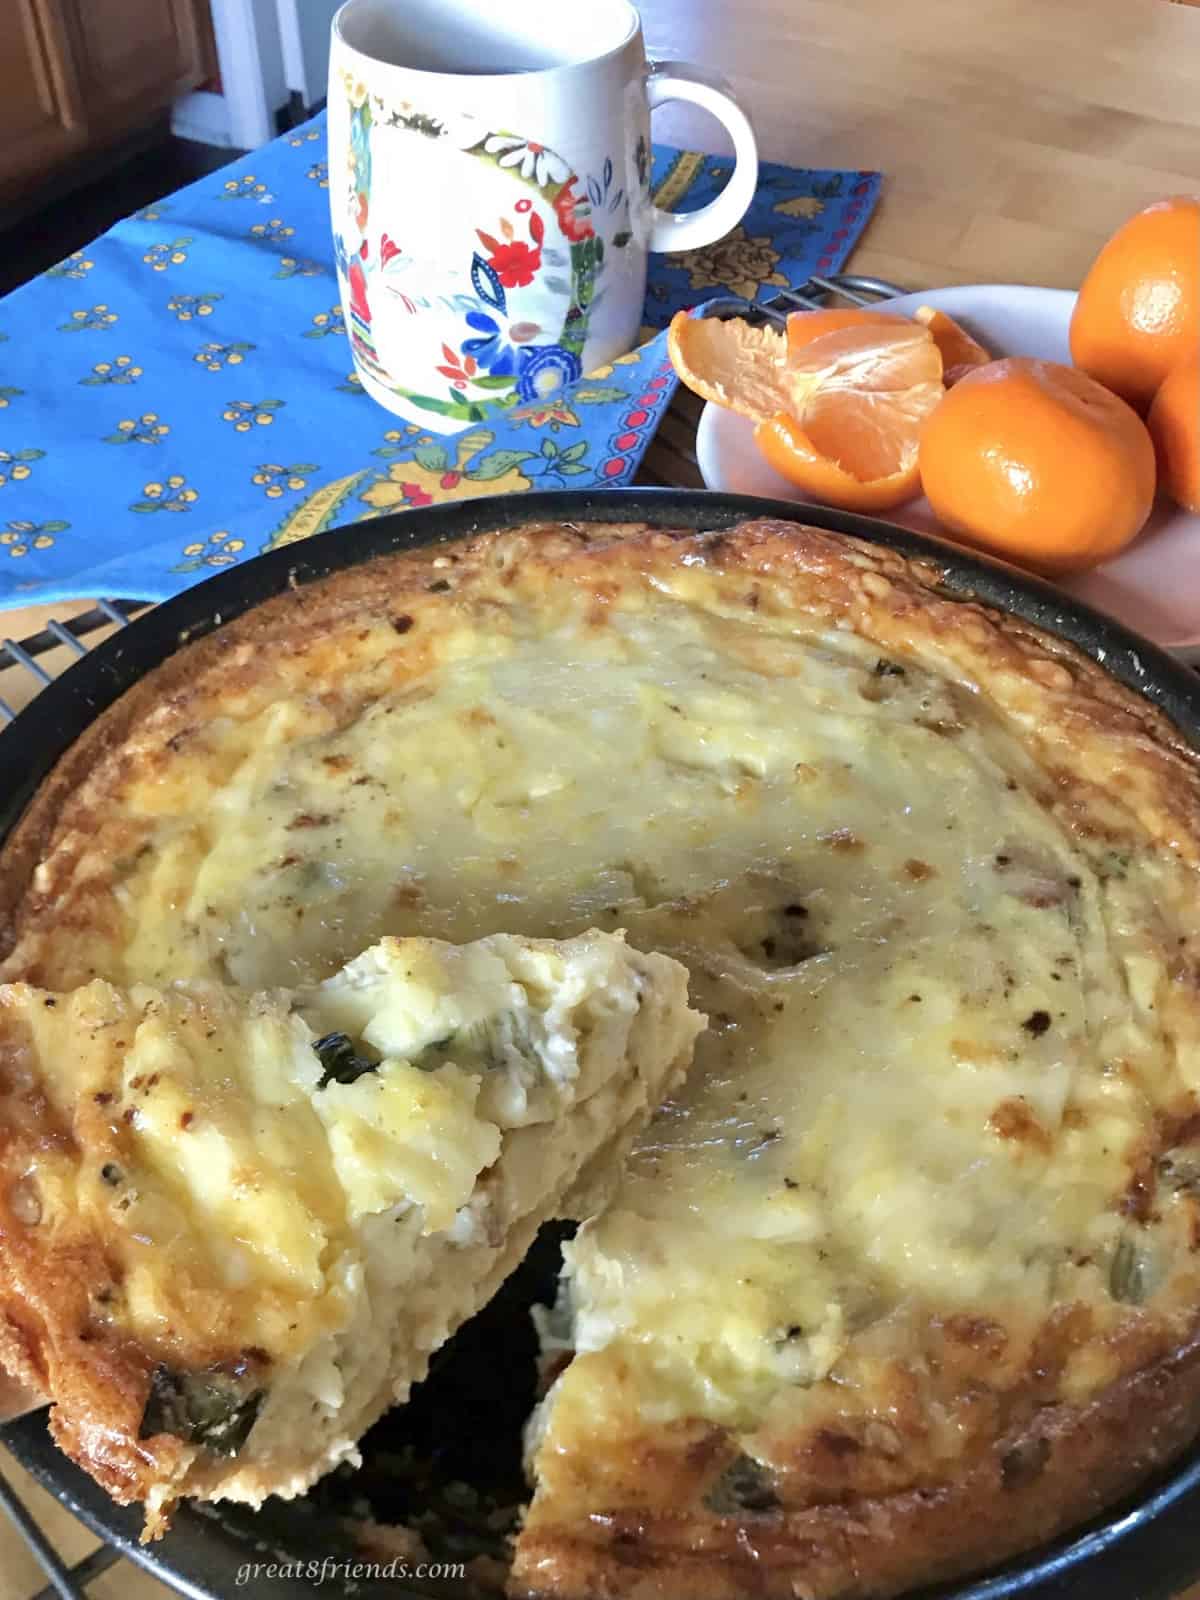 A Quiche Lorraine egg pie with a one piece being sliced with tangerines and coffee on the side.